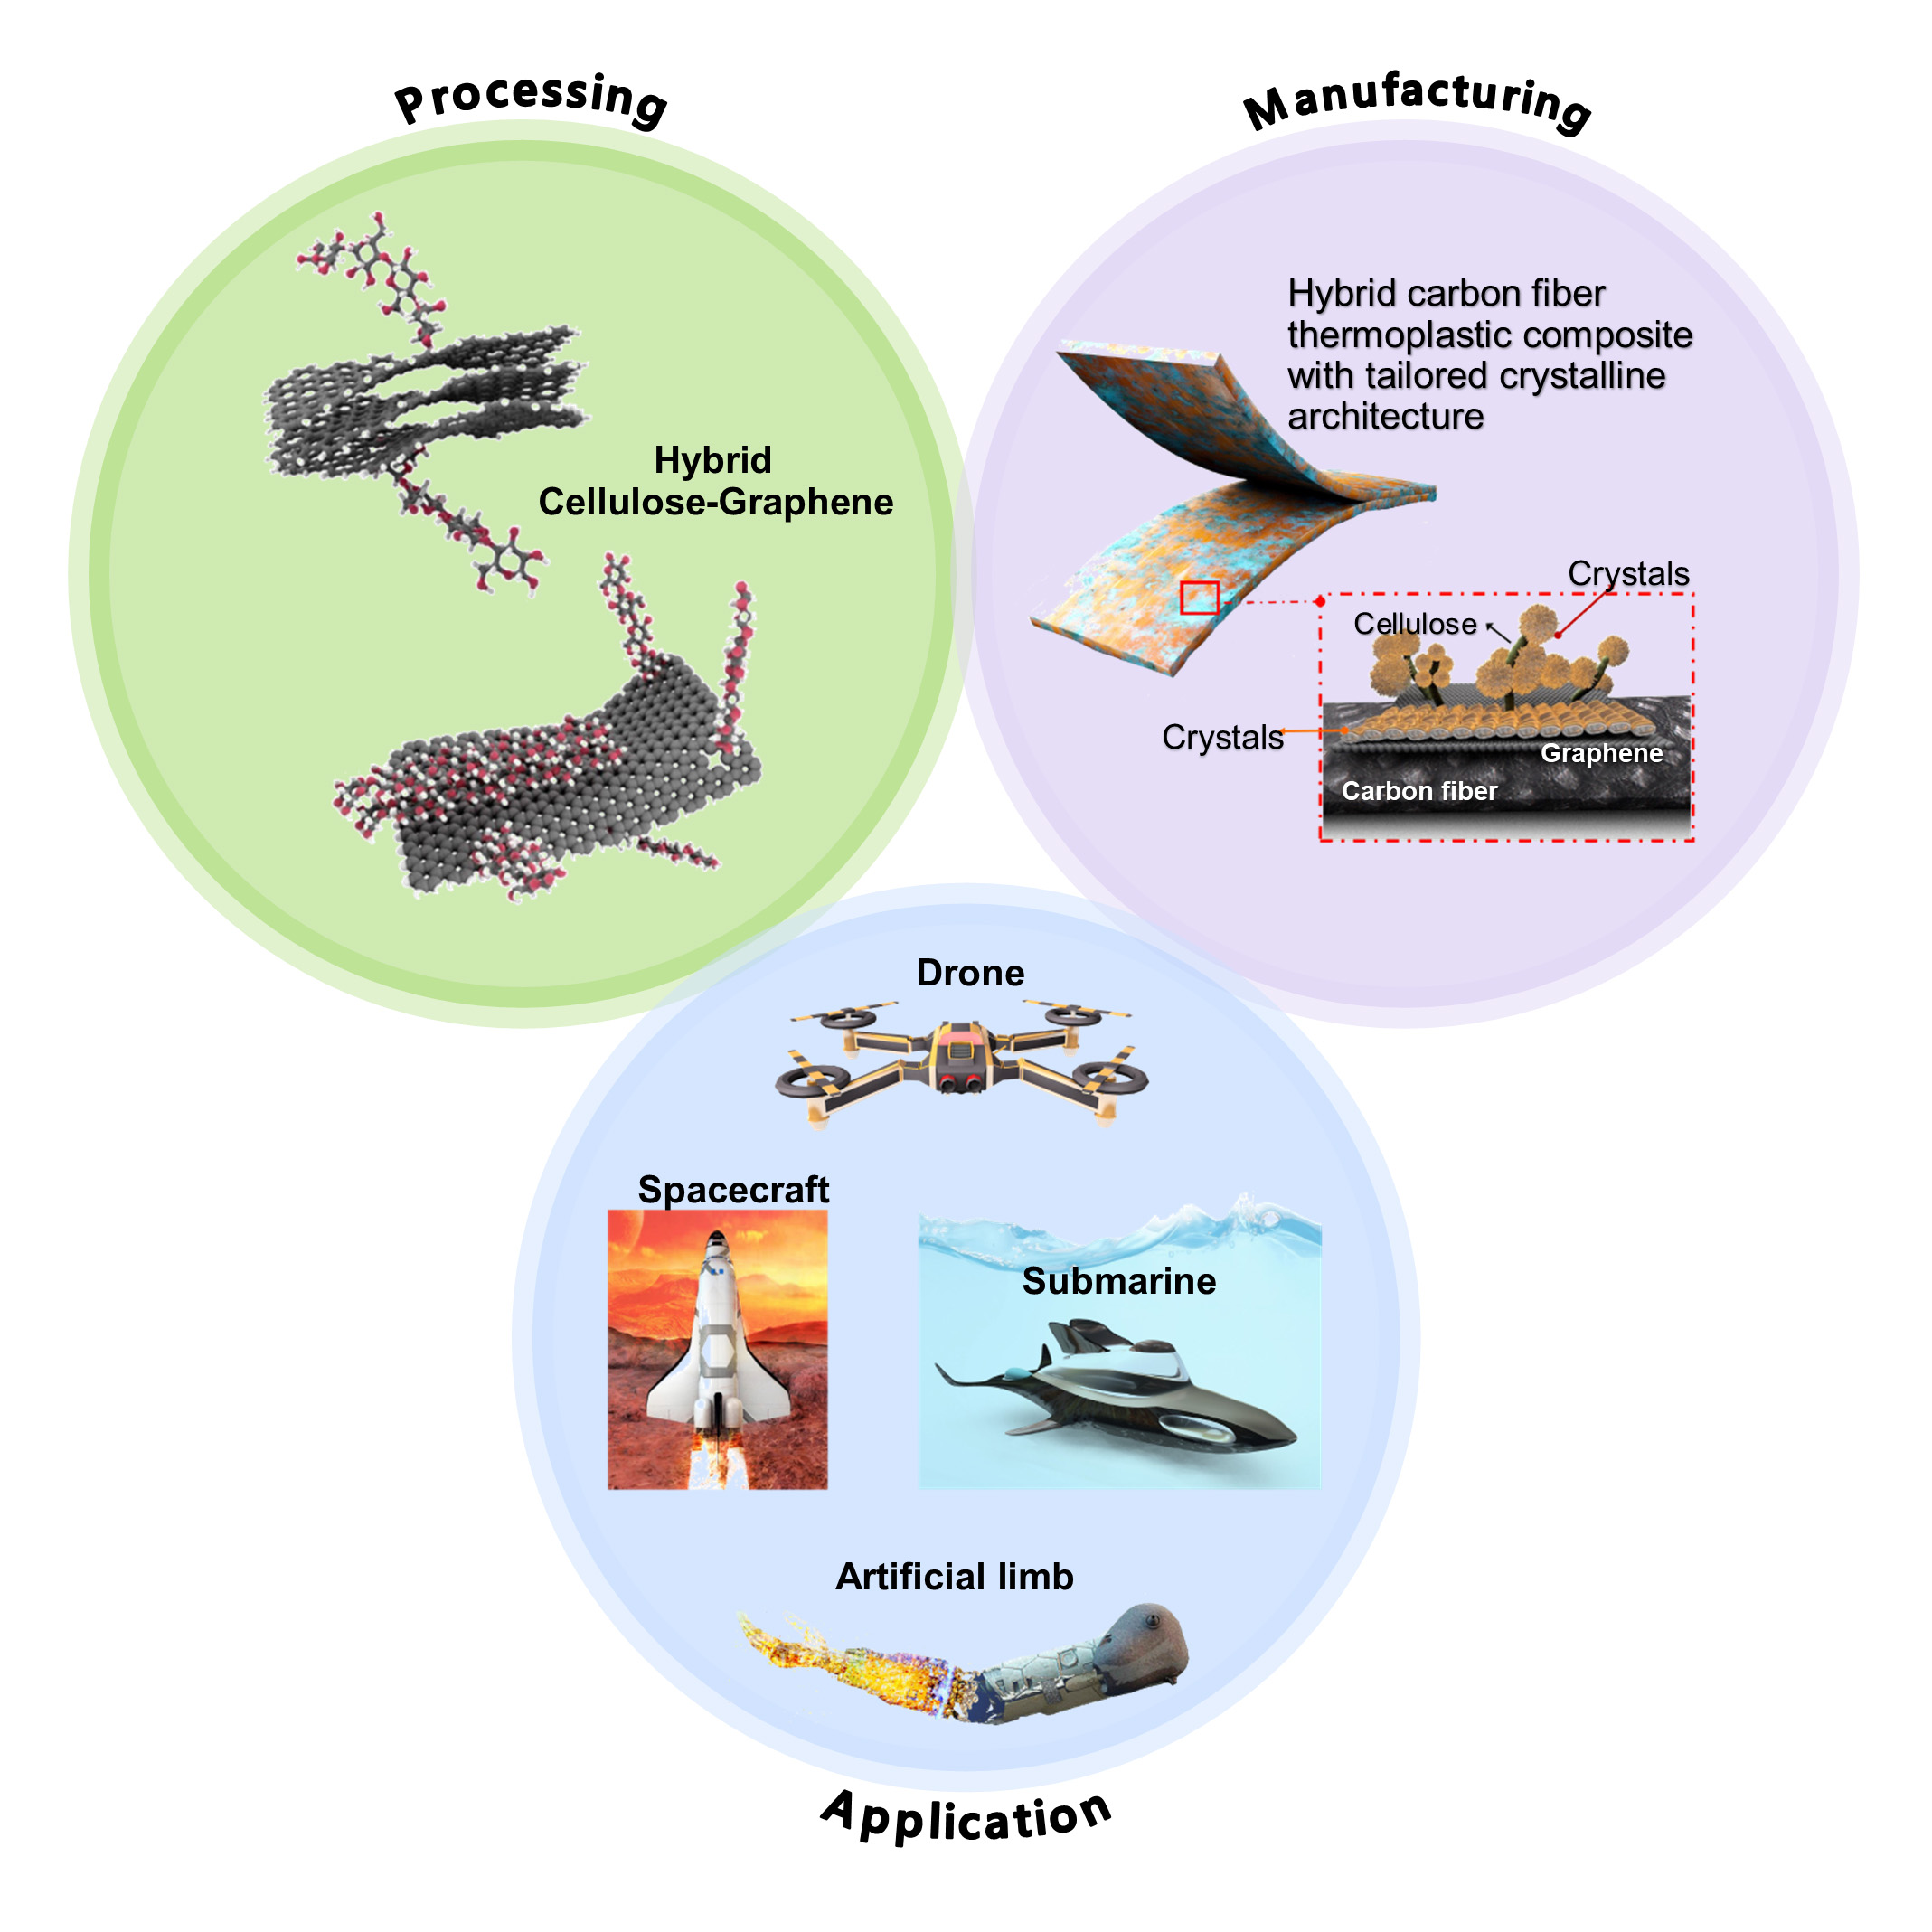 Three circles labeled Processing, Manufacturing and Application. Within the Processing circle, are Hybrid Celullose-Graphene molecules. Within the Manufacturing circle, are Hybrid Carbon Fiber Thermoplastic Composites. Within the Application circle, is an aerial drone, a spacecraft, a submarine and an artificial limb.